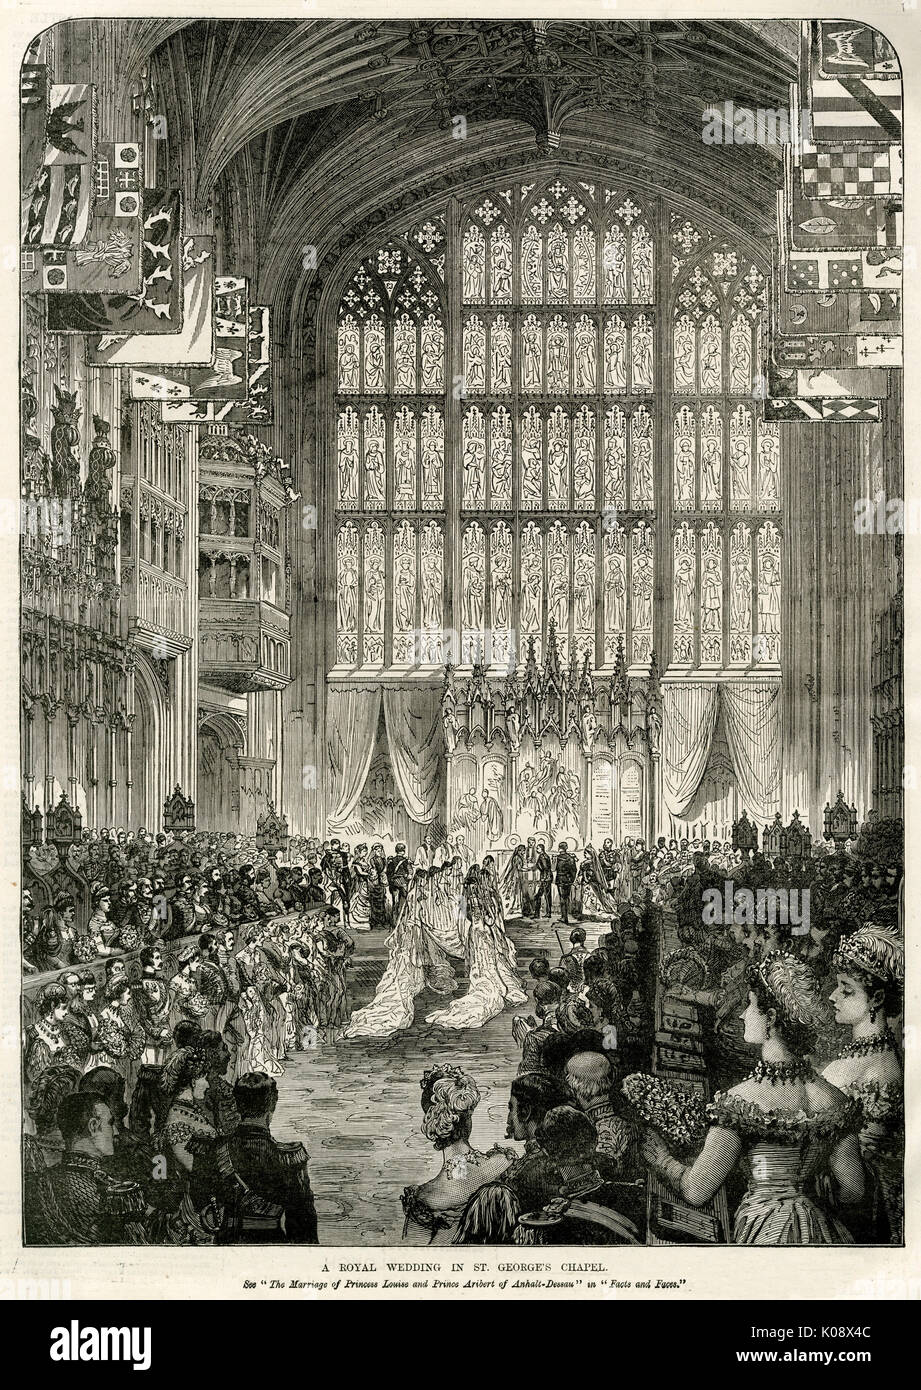 Marriage of Princess Marie-Louise of Schleswig-Holstein (younger daughter of Princess Helena, Princess Christian of Schleswig-Holstein), to Prince Aribert of Anhalt-Dessau in St. George's Chapel at Windsor Castle. The marriage was later dissolved.   6 July 1891 Stock Photo